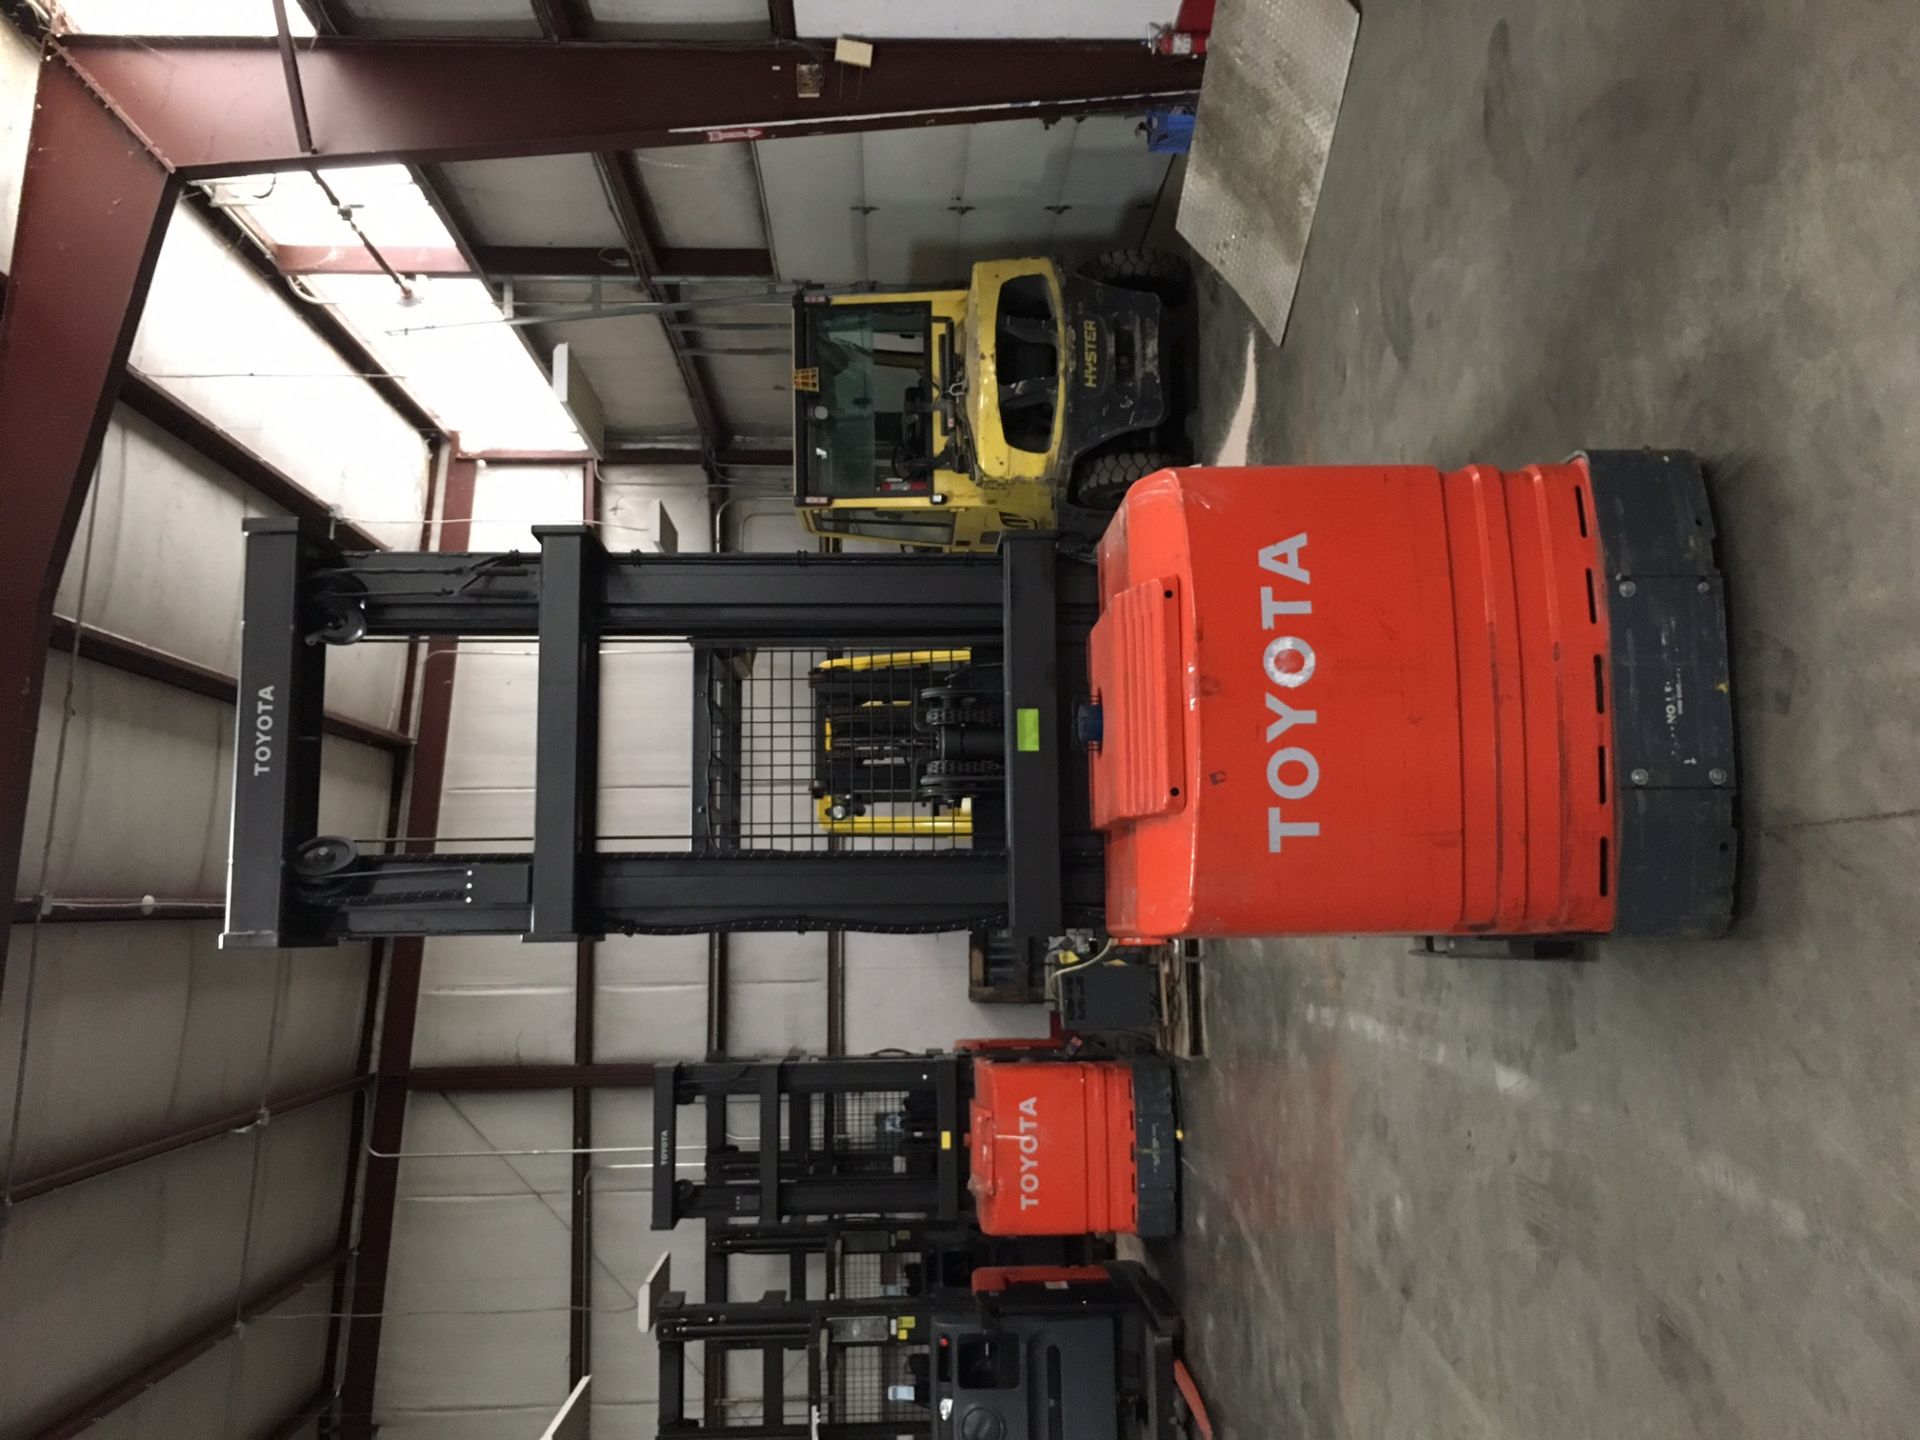 2011 TOYOTA 3,000 LB ORDER PICKER, MOD: 6BPU15, WITH 24-VOLT BATTERY, 300" RAISED, 1,231 DRIVE HOURS - Image 4 of 5